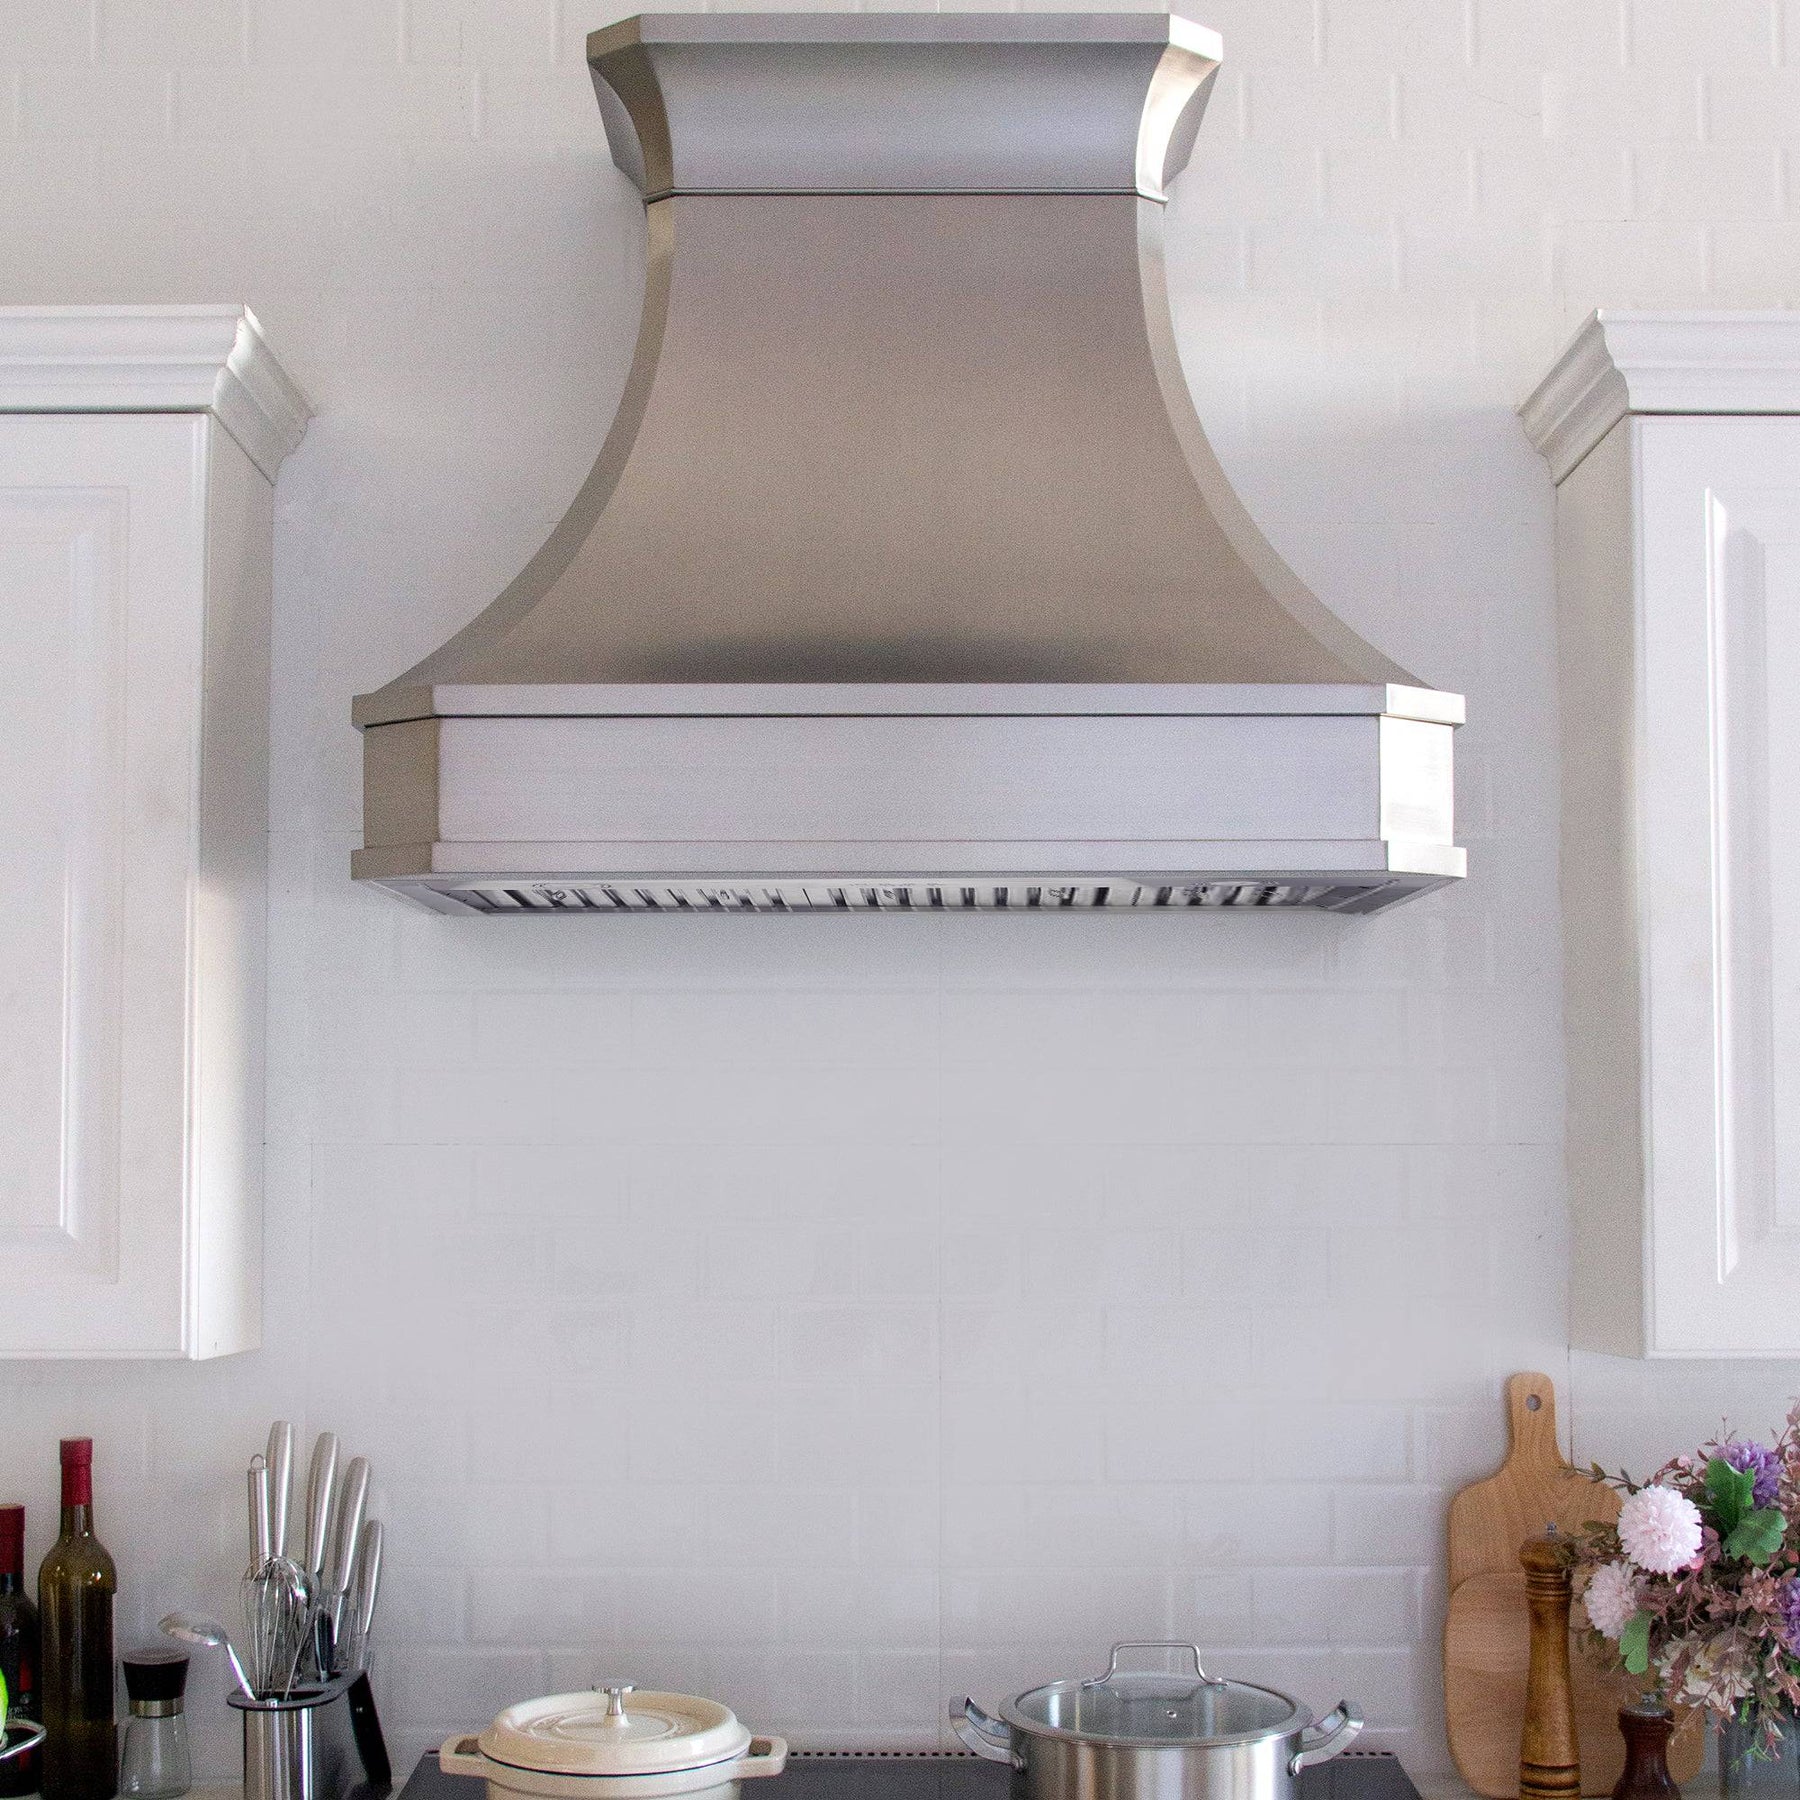 Fobest Custom Handcrafted Curved Stainless Steel Range Hood with Classic Crown FSS-64 - Stainless Steel Range Hood-Fobest Appliance